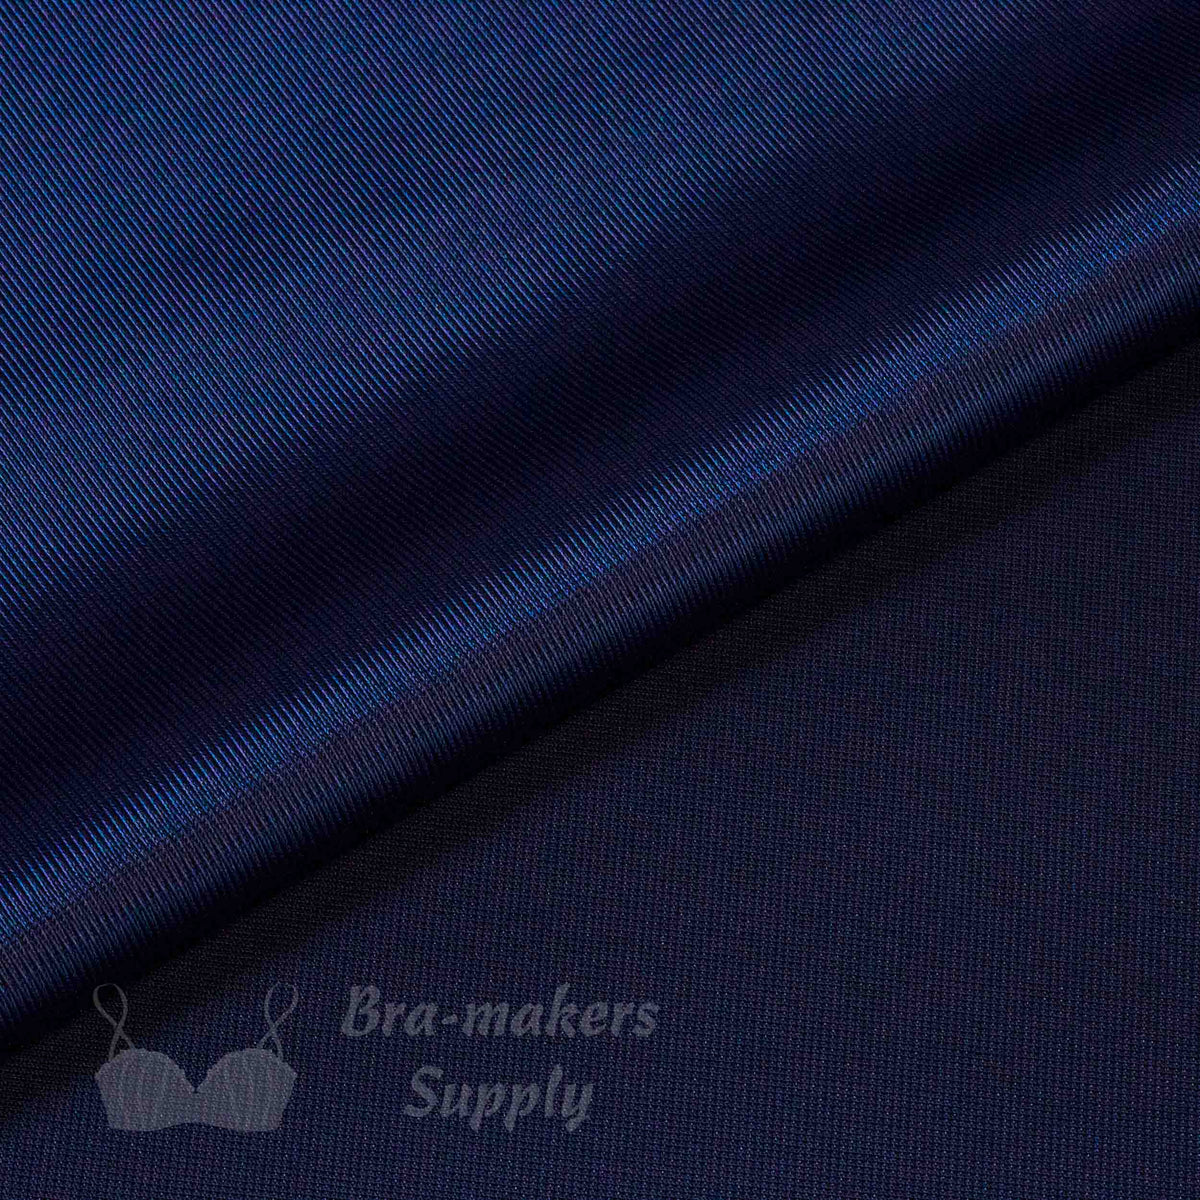 http://themakehouse.ca/cdn/shop/products/duoplex-reversible-low-stretch-bra-cup-fabric-FJ-6-navy-blue-low-stretch-bra-cup-fabric-blueprint-Pantone-19-3939-from-Bra-Makers-Supply-folded_1200x1200.jpg?v=1633491917